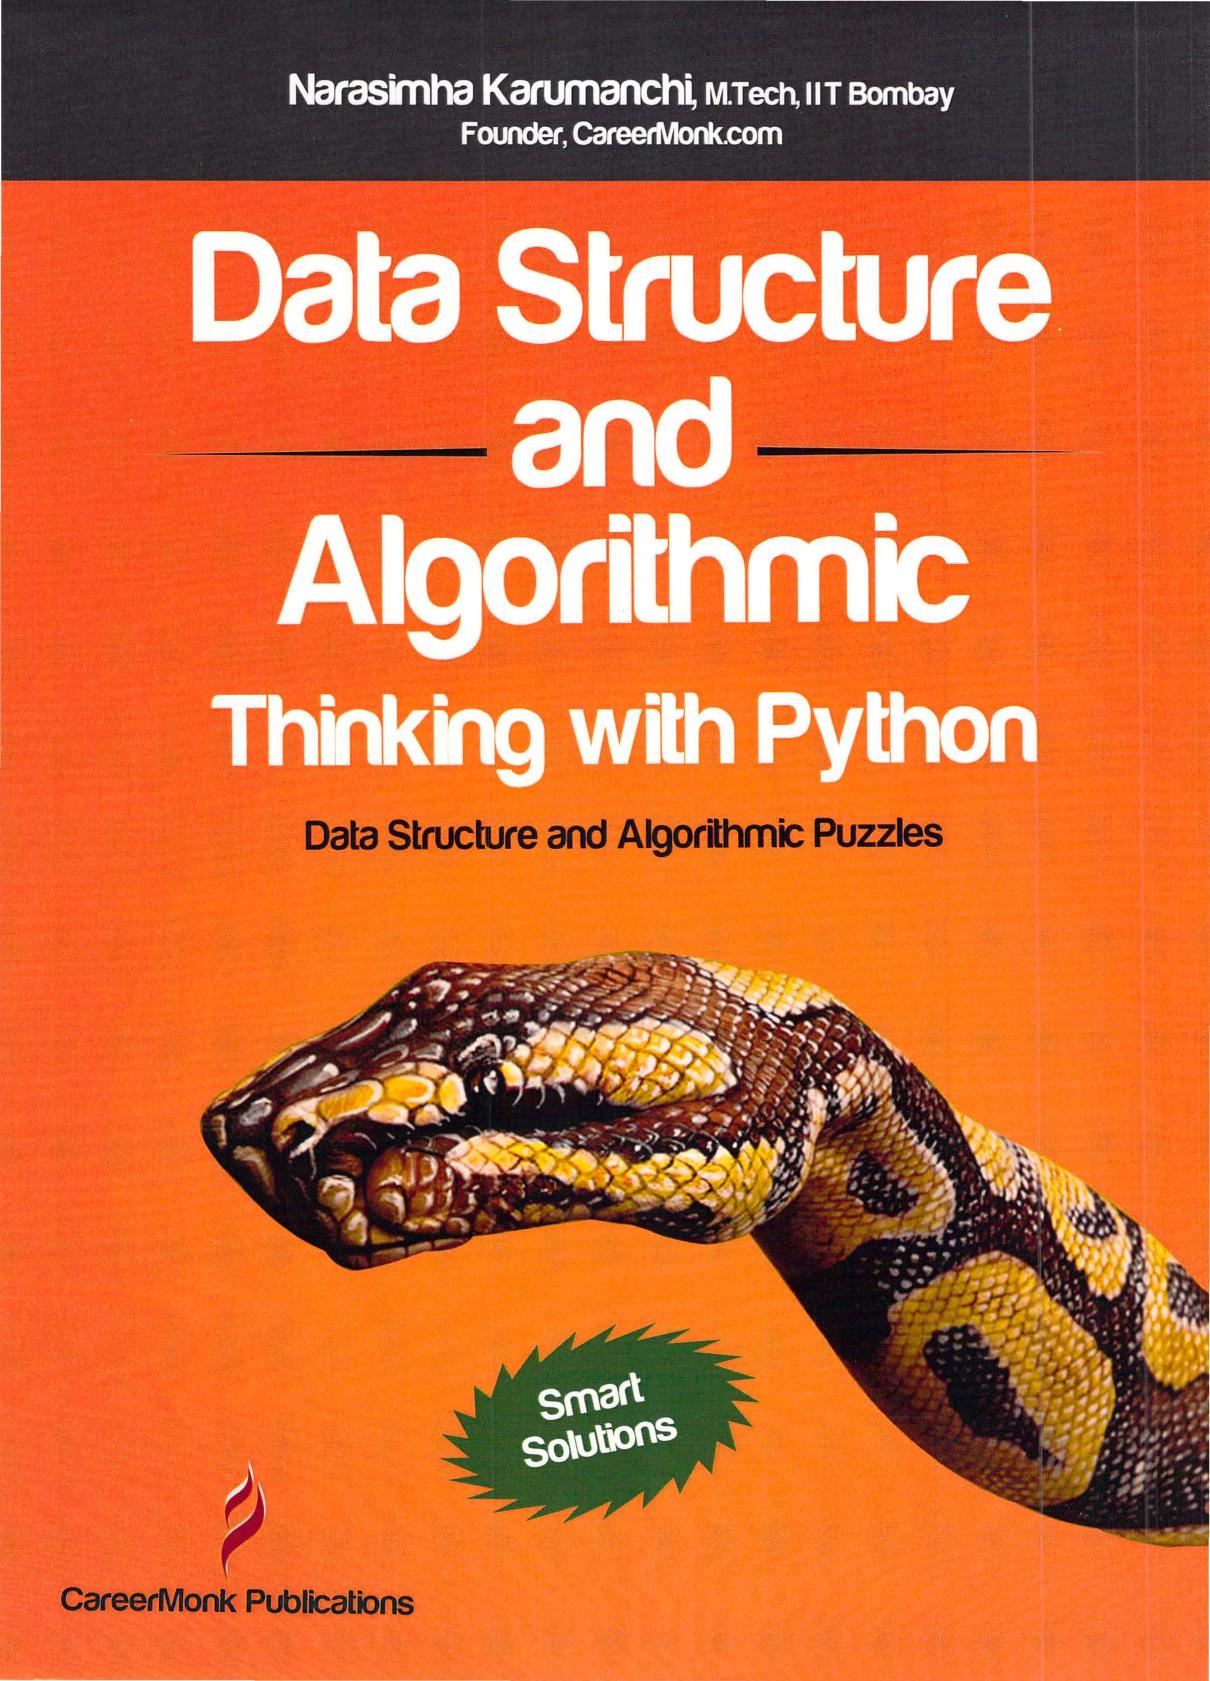 Data Structure and Algorithmic: Thinking With Python, Data Structure and Algorithmic Puzzles